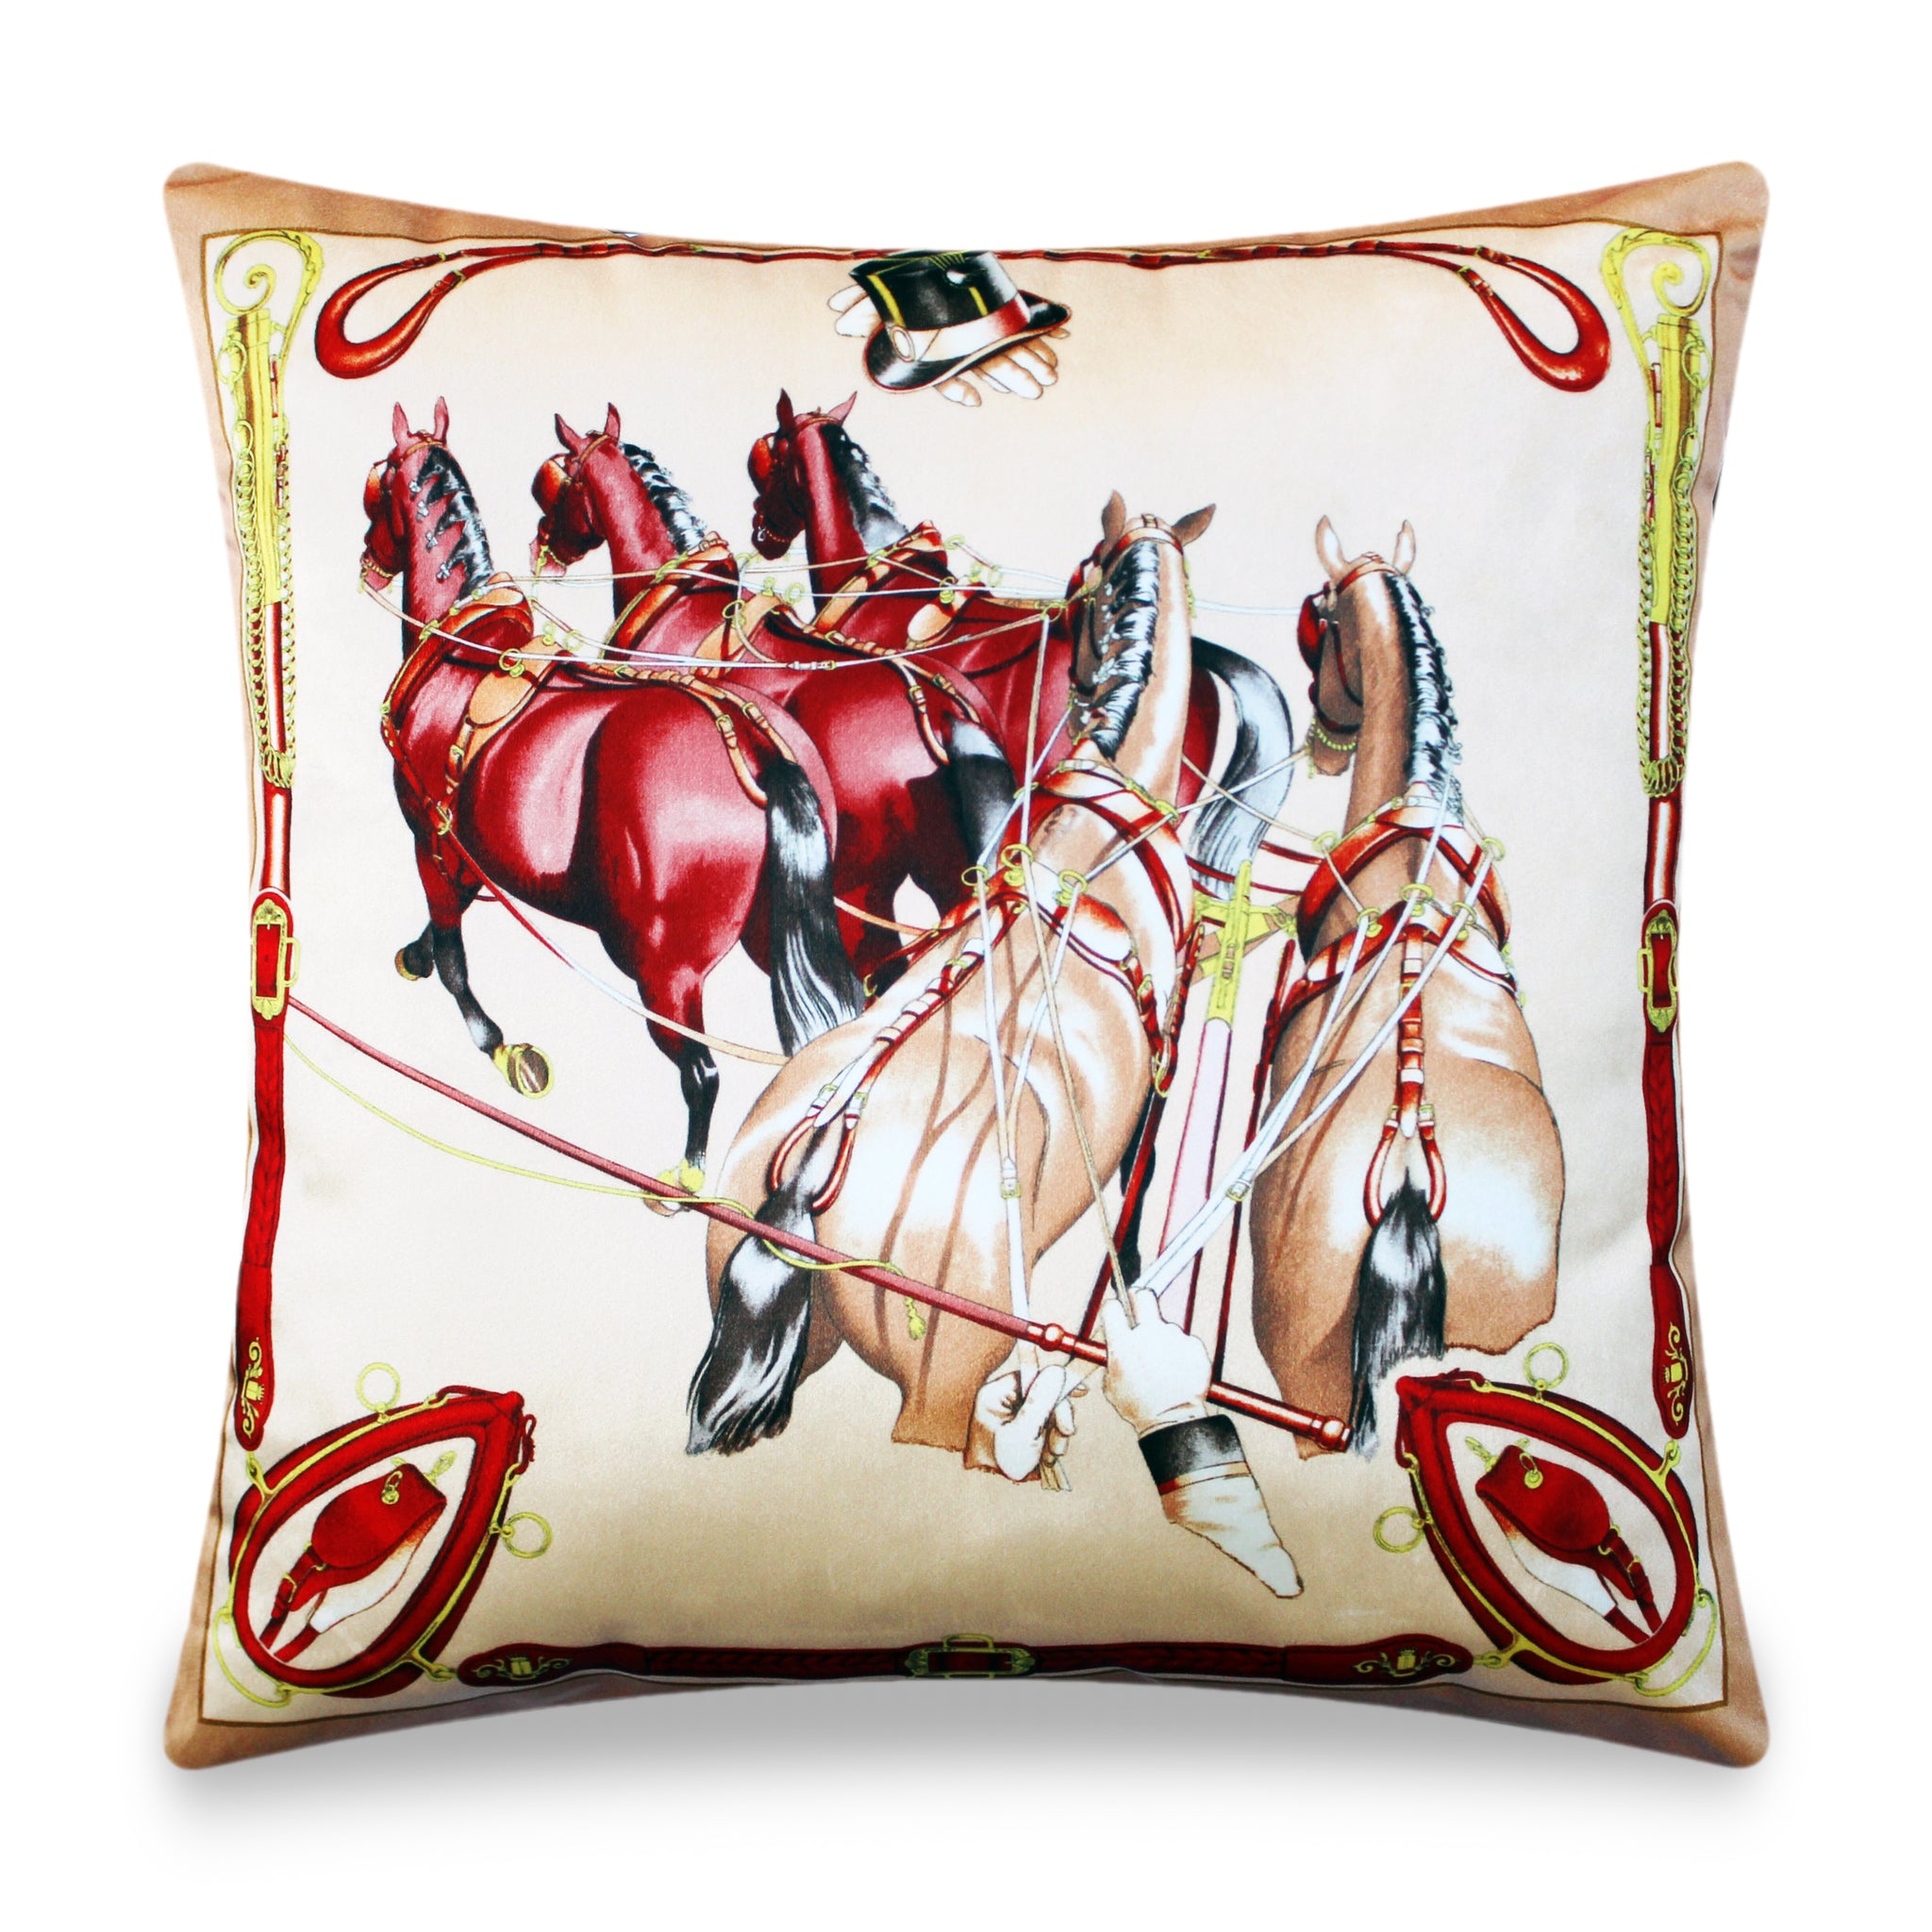 Yellow Velvet Cushion Cover, Hermes Inspired Horse Printed Decorative Pillow, Vintage Home Décor Throw Pillow Cover,  45 x 45 CM